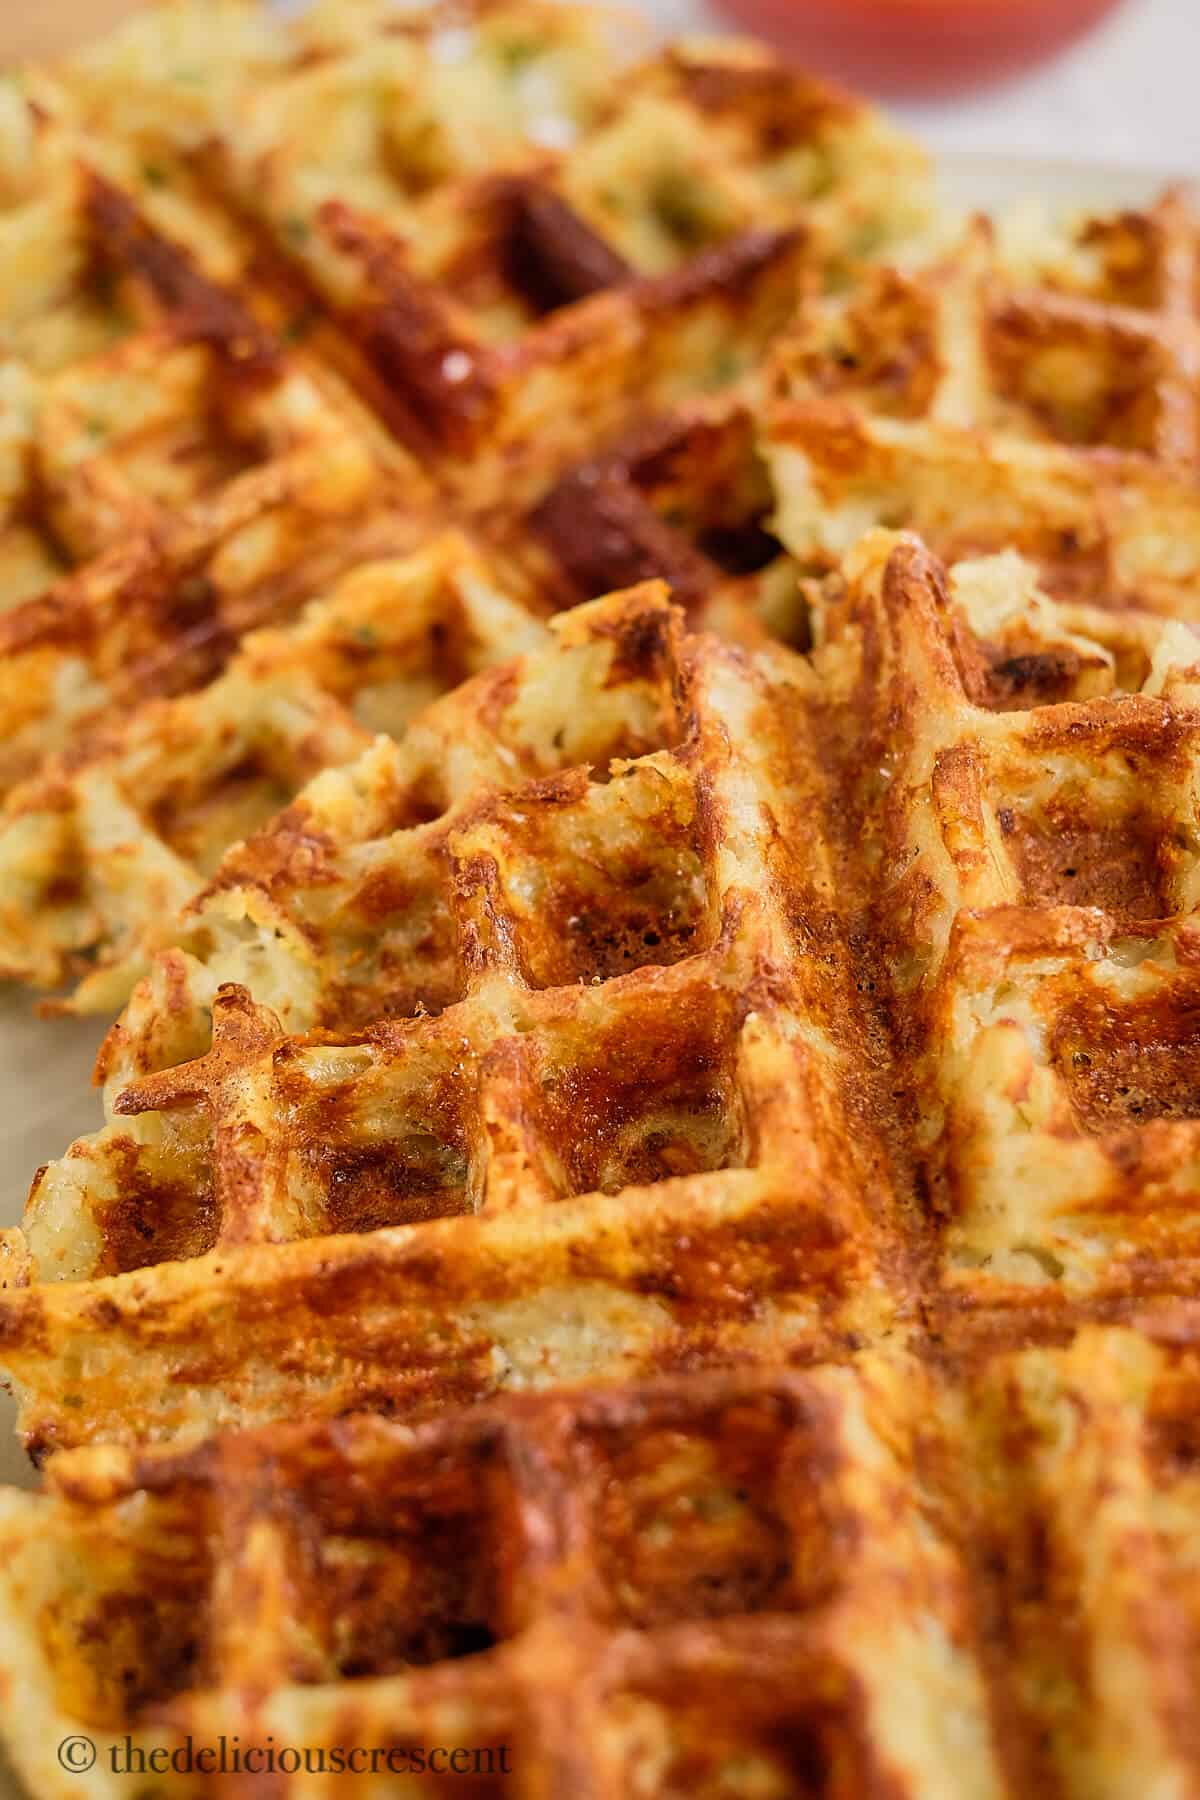 https://www.thedeliciouscrescent.com/wp-content/uploads/2022/10/Potato-Waffles-1.jpg